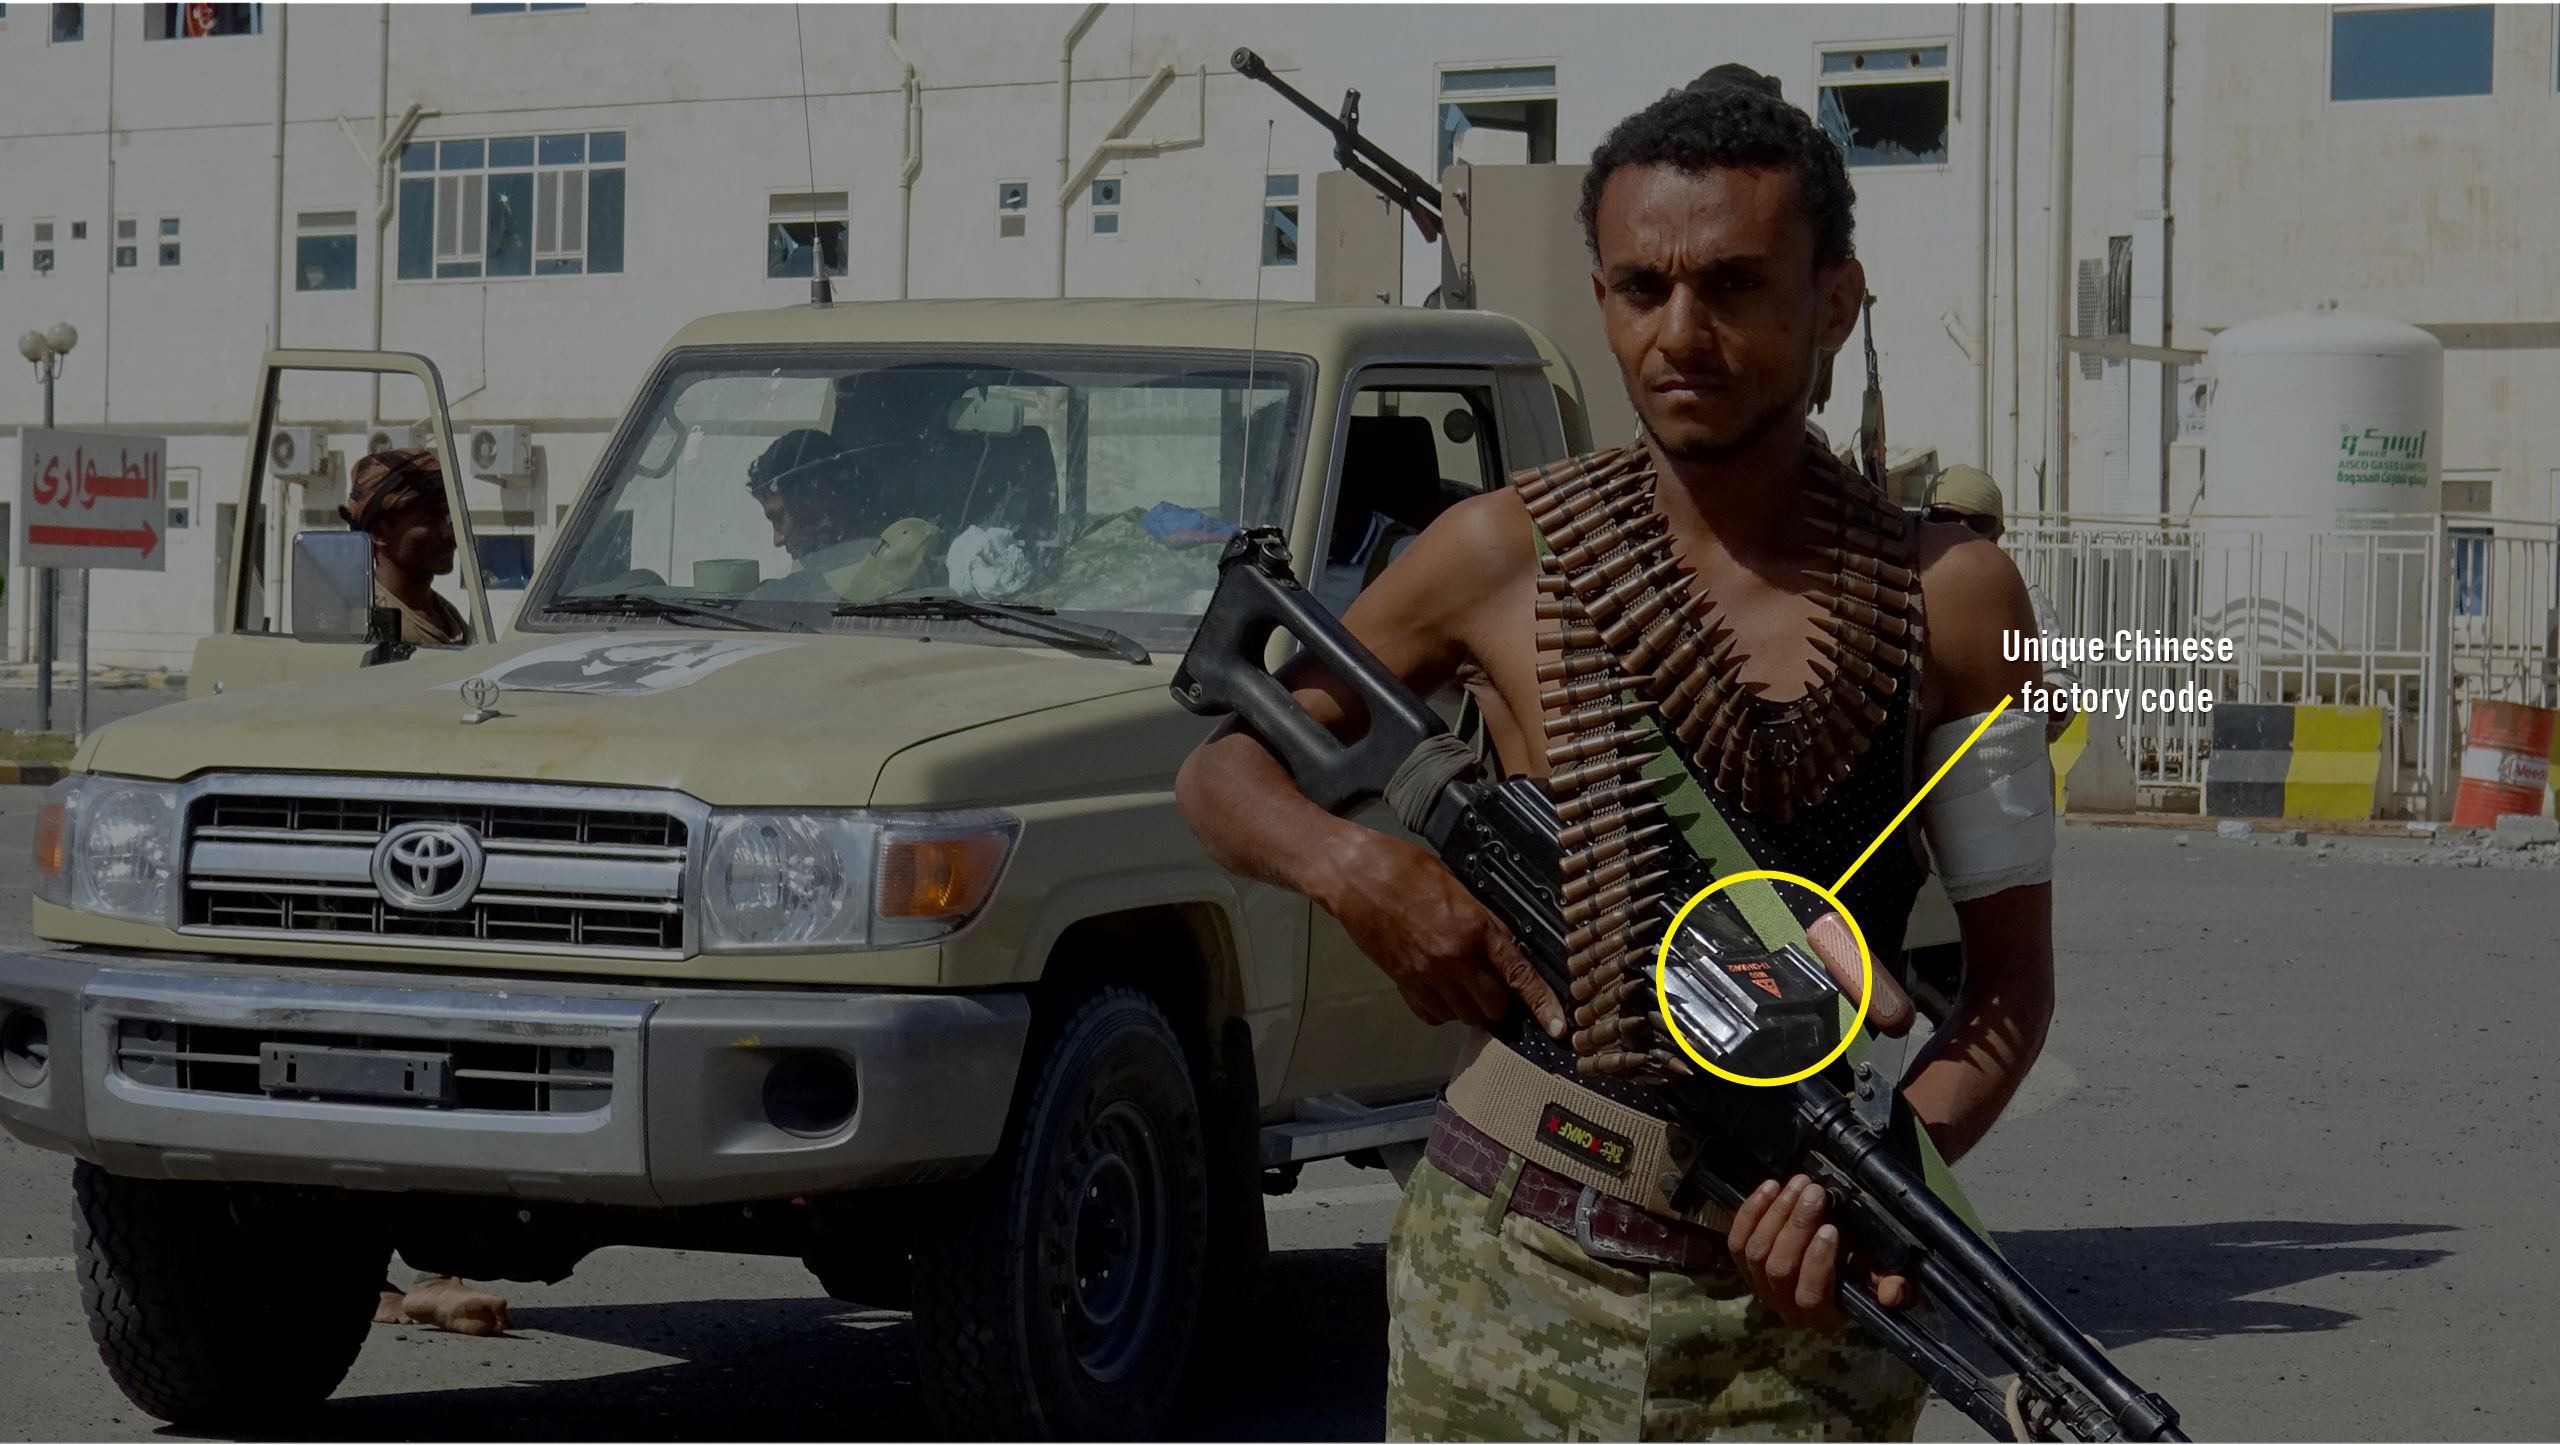 A Chinese Type 80 machine gun, supplied to Sudan and diverted to Yemen. 